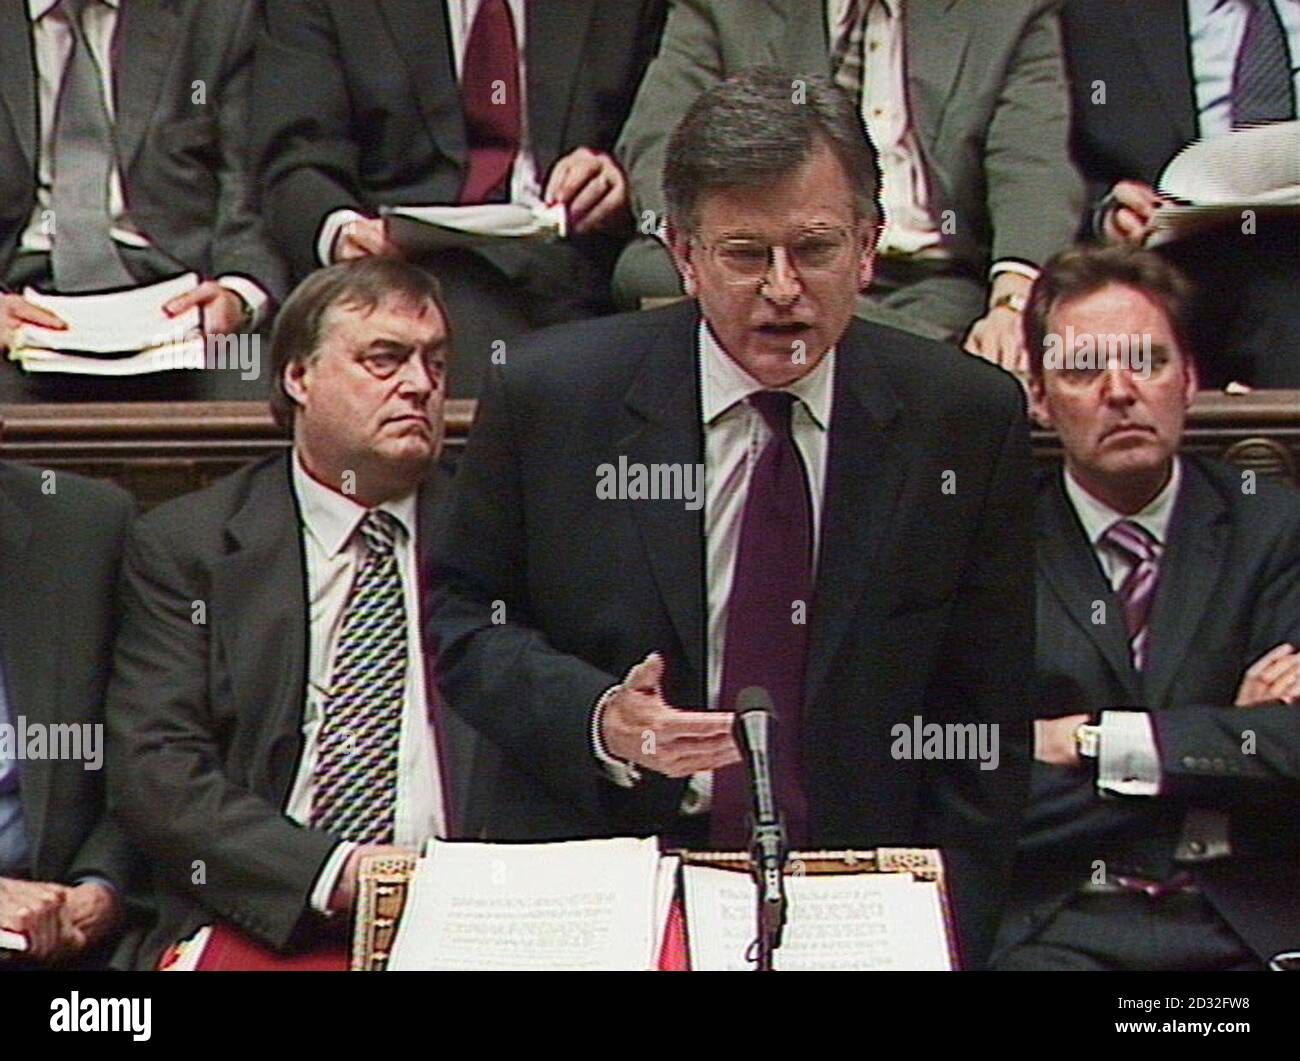 Transport Secretary Stephen Byers makesa a statement in the House of Commons, to MPs about the circumstances aurrounding the departure of his department's press chief Martin Sixsmith.    *  The department admitted earlier this week that Mr Sixsmith had not resigned, as Mr Byers had told the Commons in February. Stock Photo